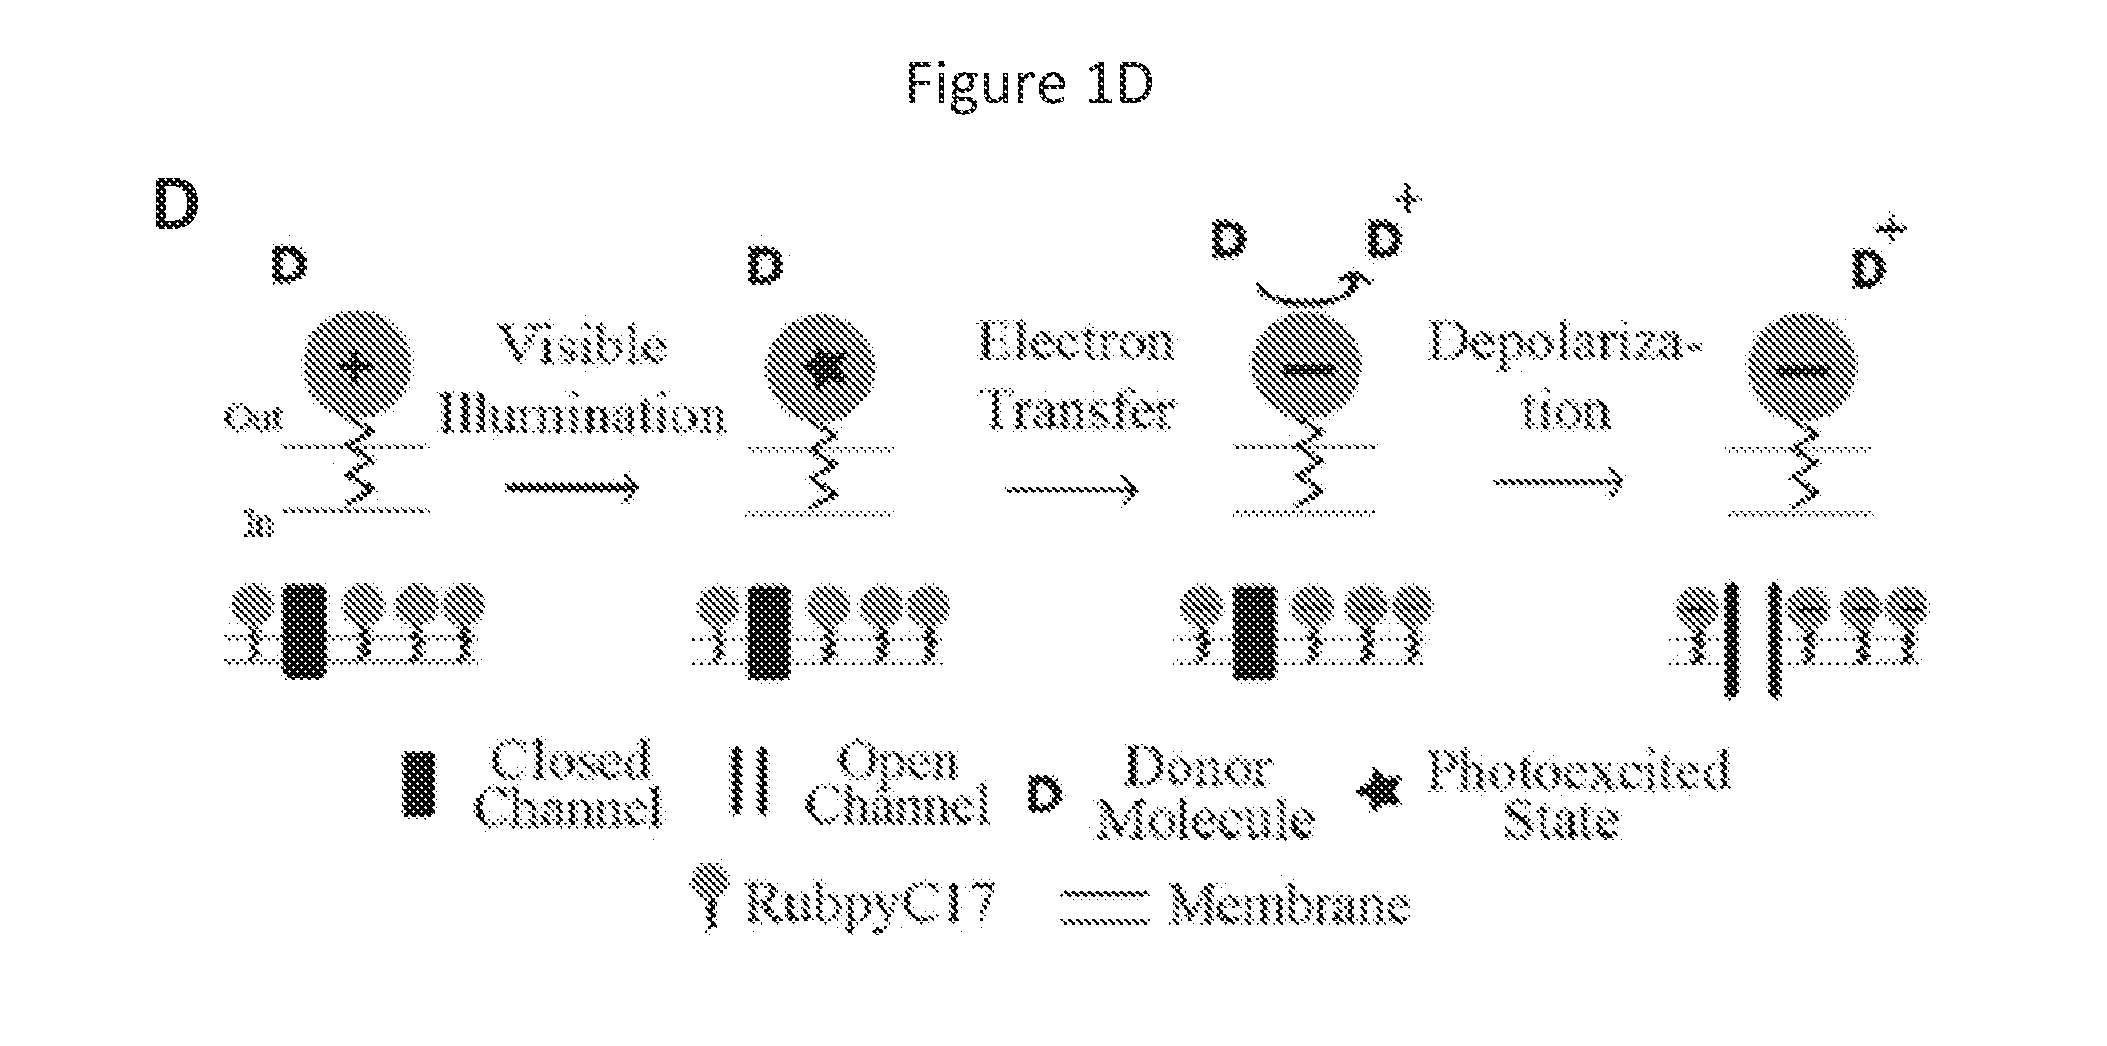 Photoactivated molecules for light-induced modulation of the activity of electrically excitable cells and methods of using same